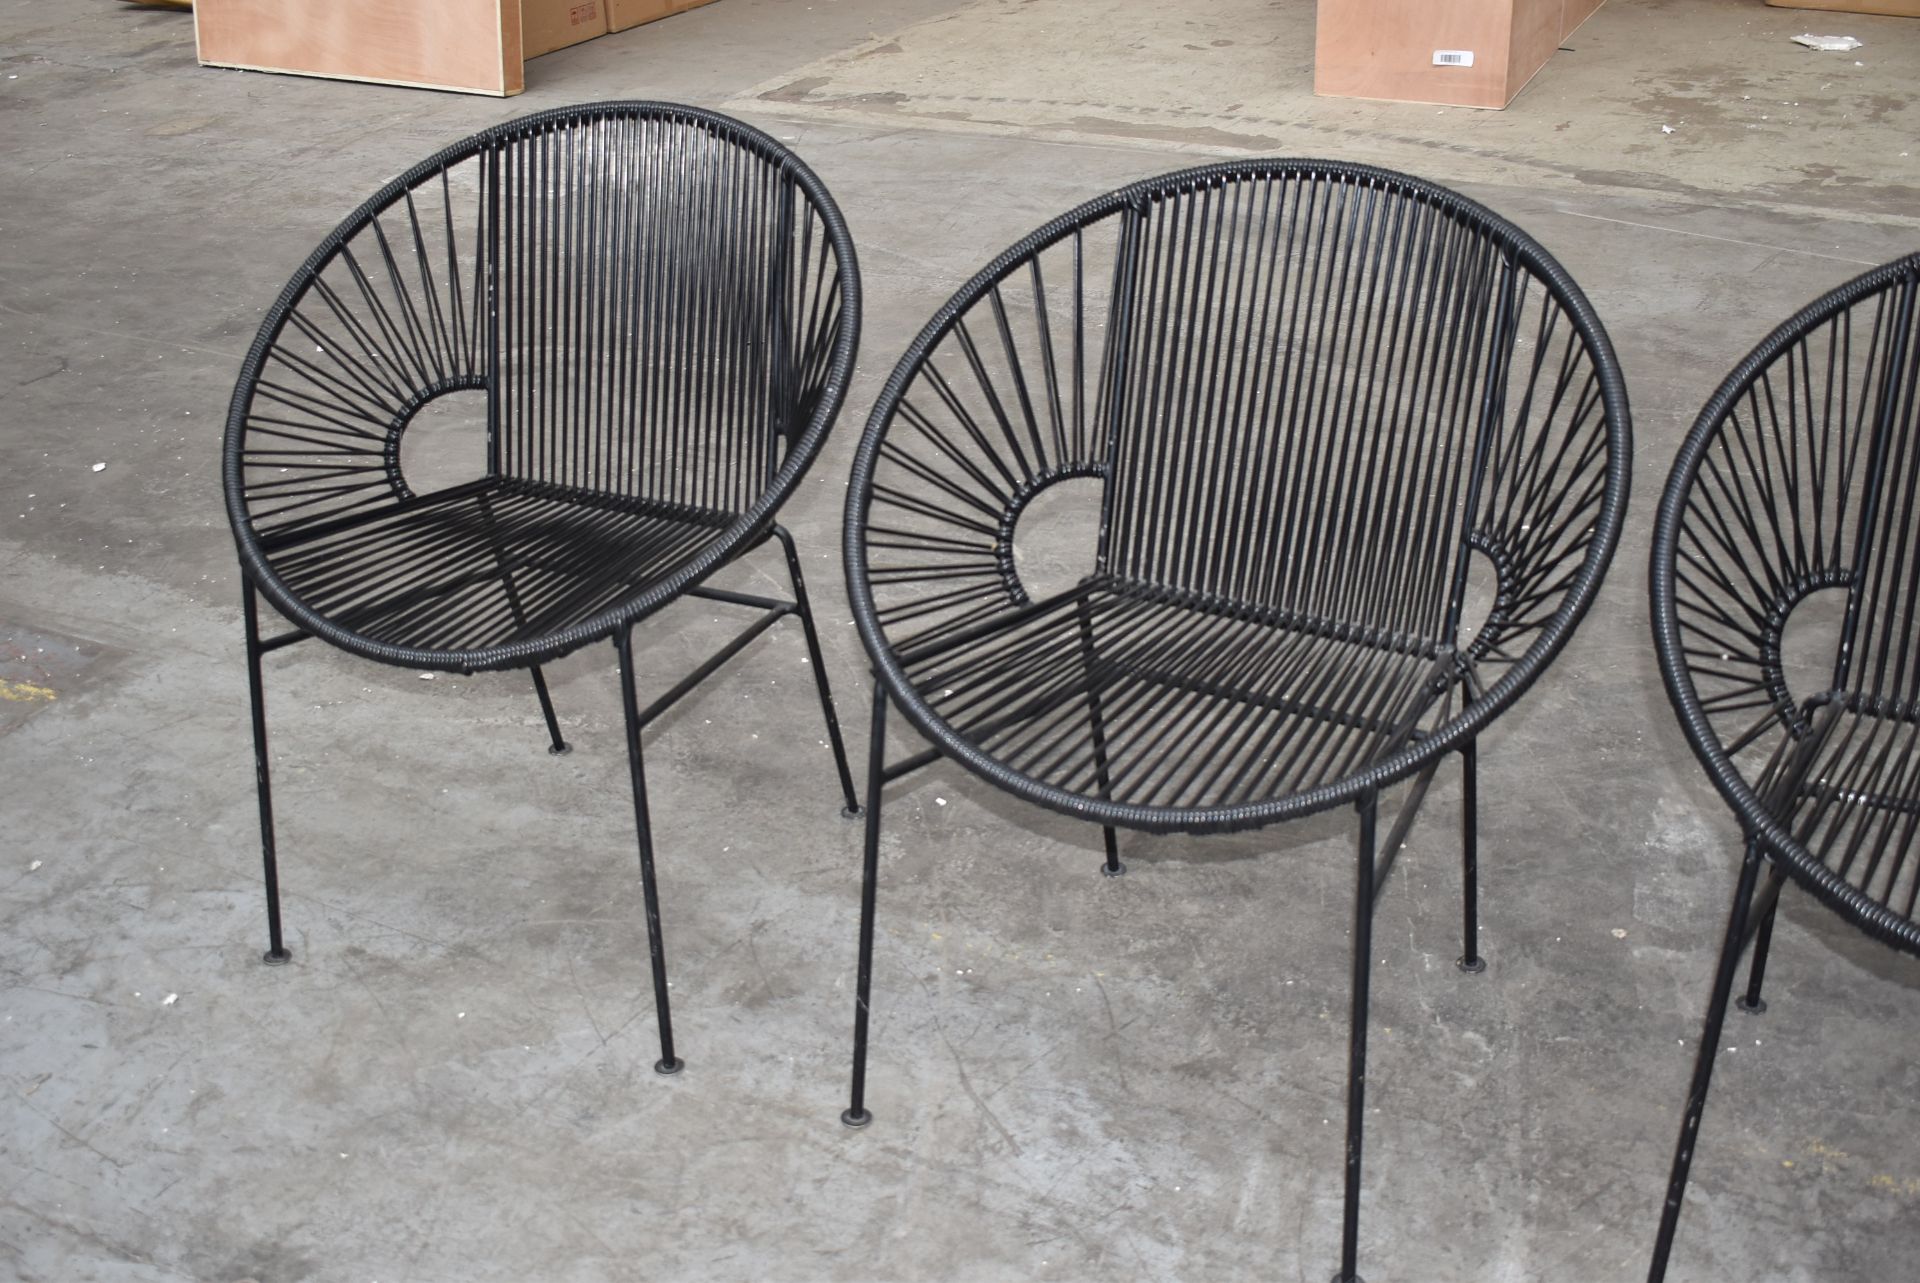 4 x Innit Designer Chairs - Acapulco Style Chairs in Black Suitable For Indoor or Outdoor Use - - Image 7 of 11